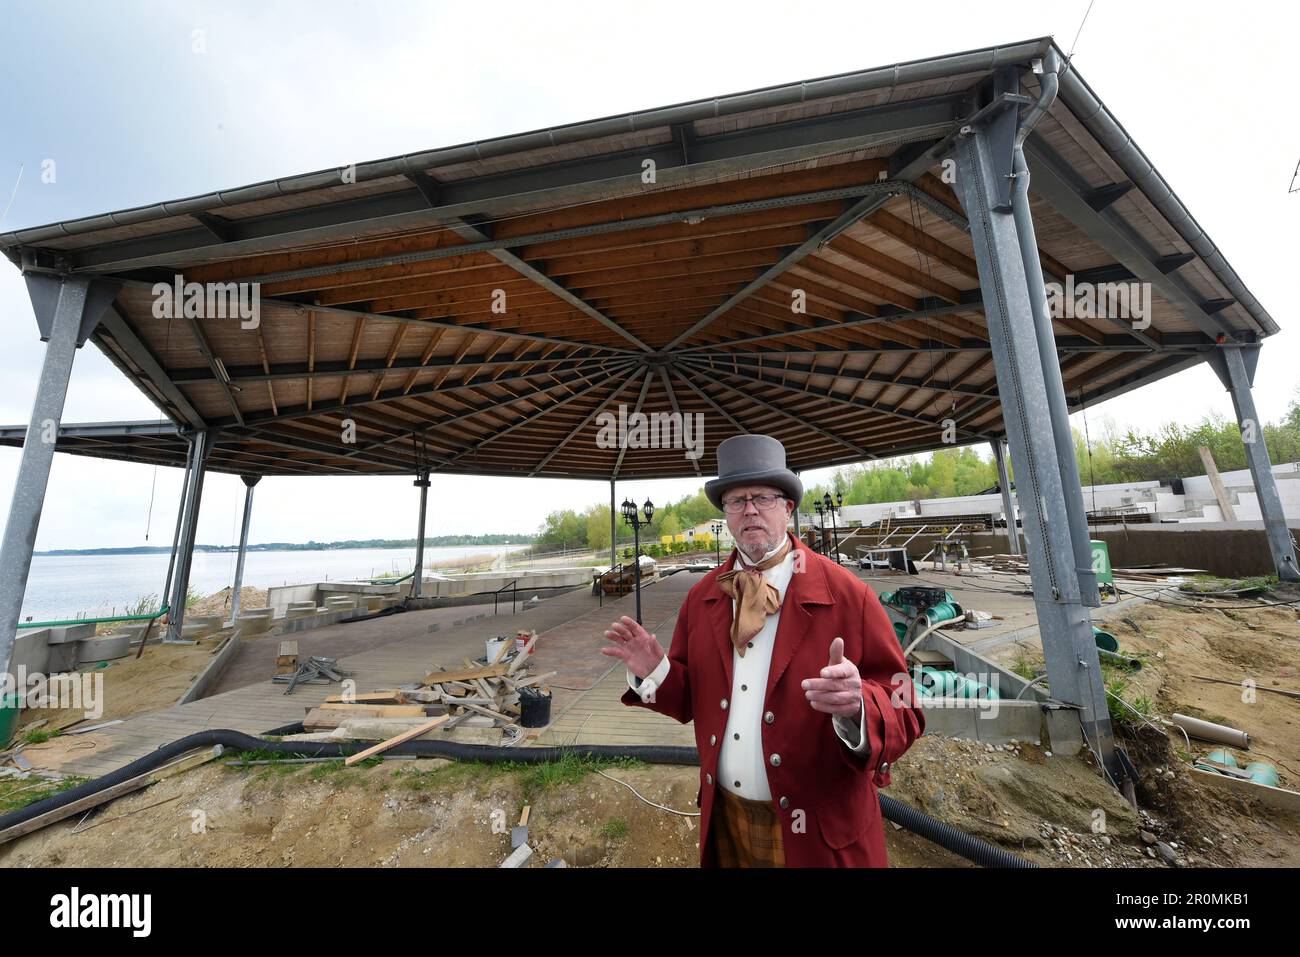 PRODUCTION - 06 May 2023, Saxony, Schkeuditz Hayna: The project manager of the Haynaer Strandverein e.V. Christoph Zwiener stands on the lake stage at the Biedermeier beach in the costume of a scientist from the musical 'Journey to the Center of the Earth'. The play, based on a novel by Jules Verne, will have its premiere in the summer on the occasion of the 25th anniversary of the music theater association on the stage at Schladitzer See in Hayna, a remnant of the former open-cast lignite mine, which has been redesigned by then, as part of the Biedermeier Cultural Festival. By the summer, th Stock Photo